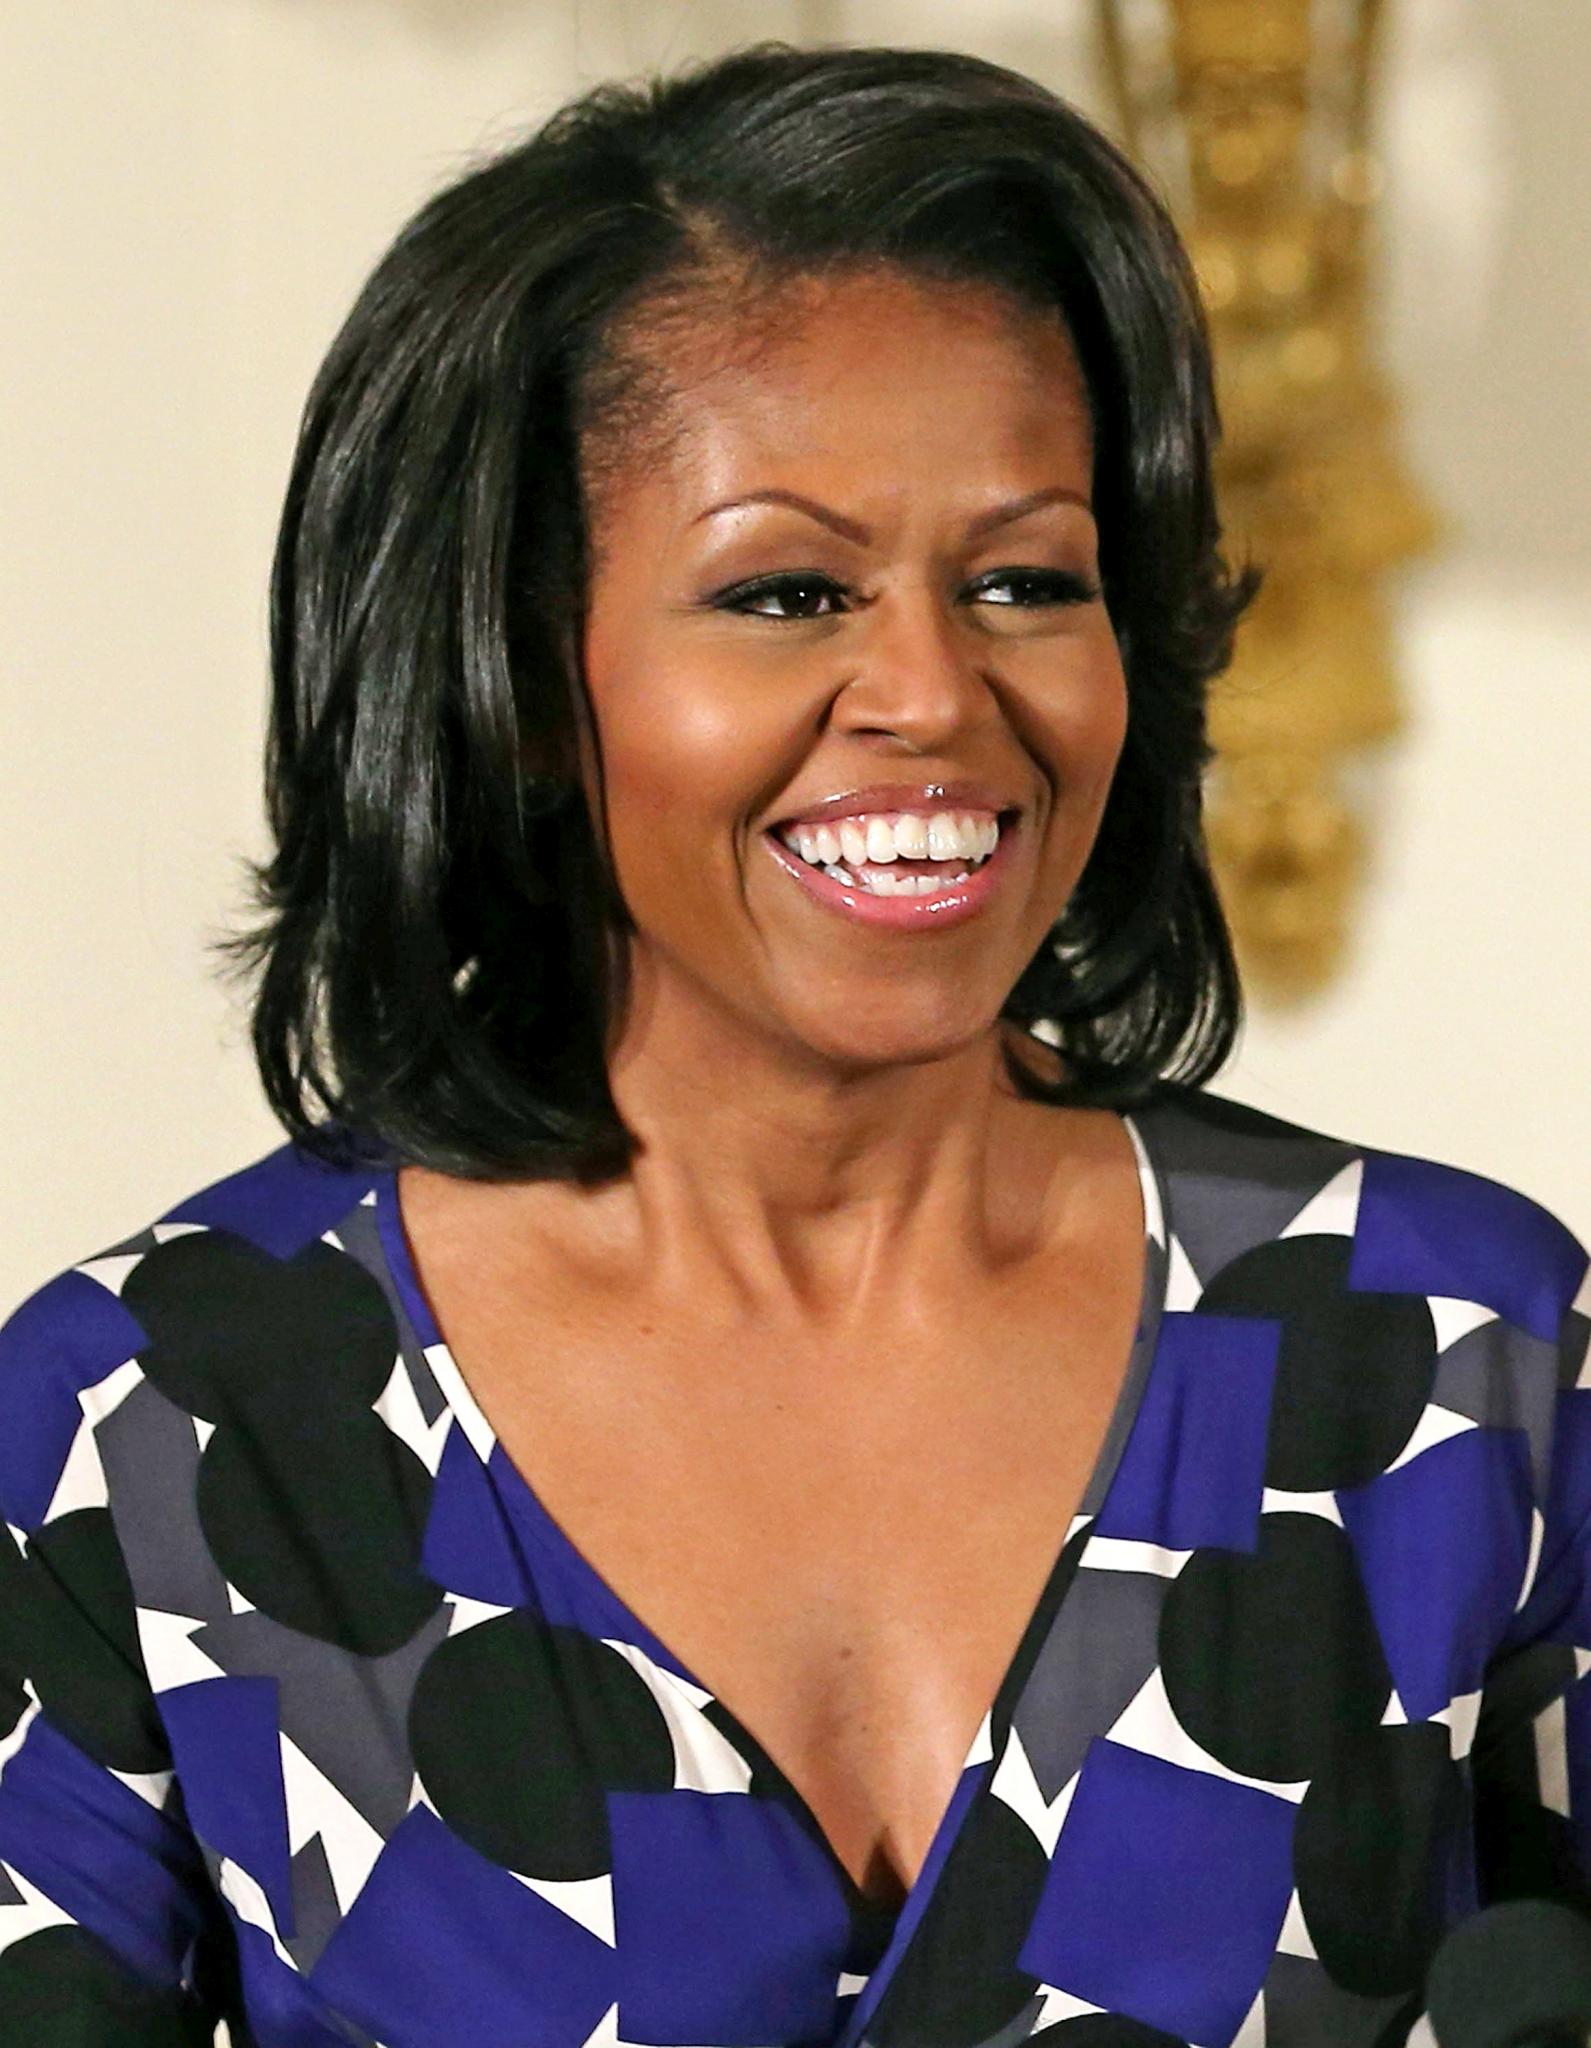 Michelle Obama Opens New Twitter Account
